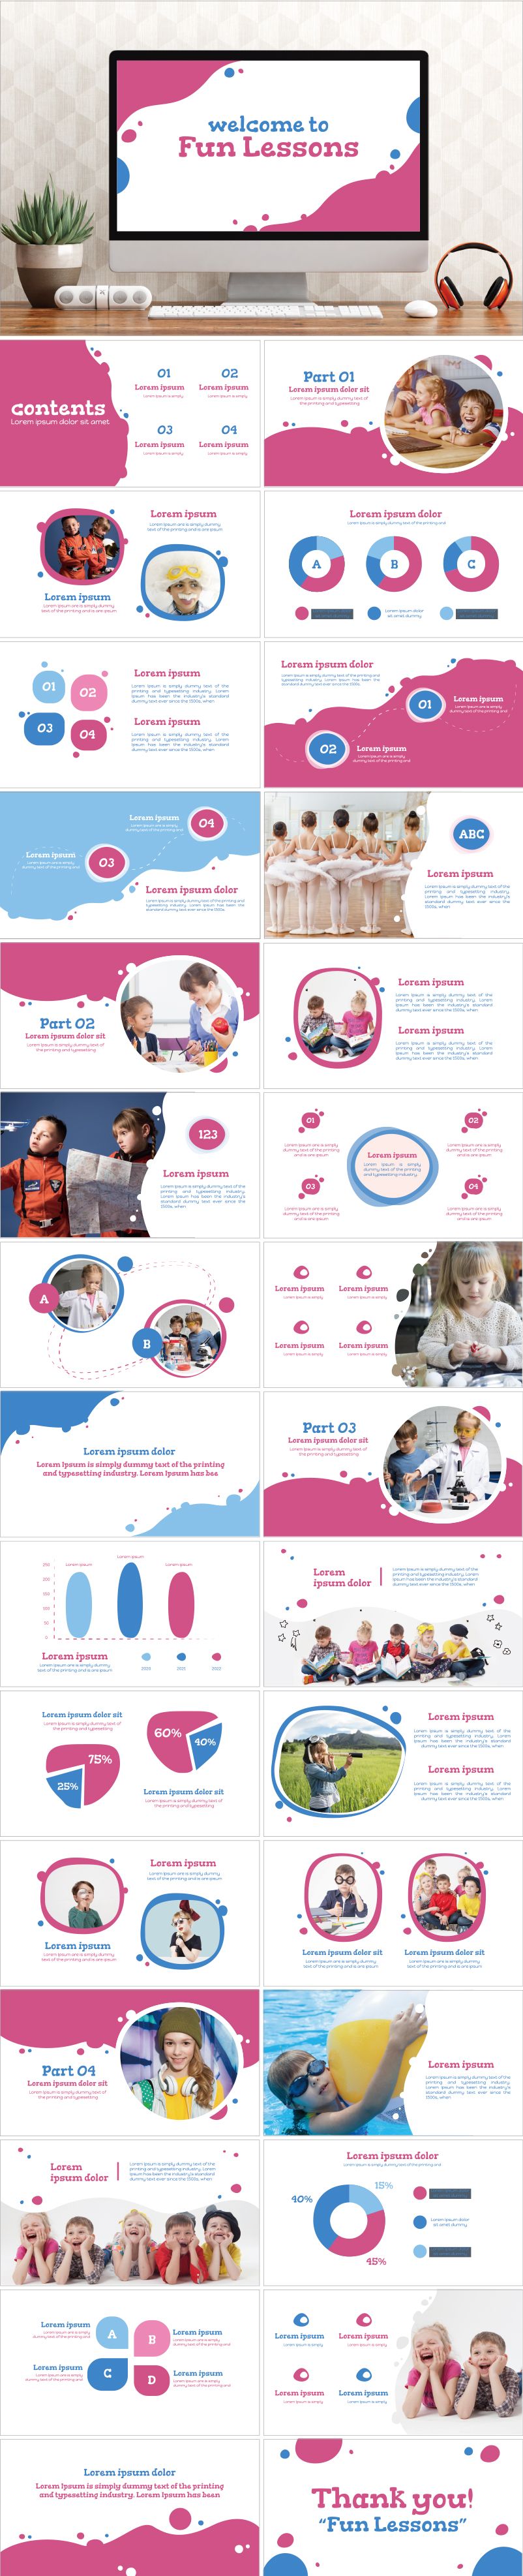 PowerPoint template vol.30